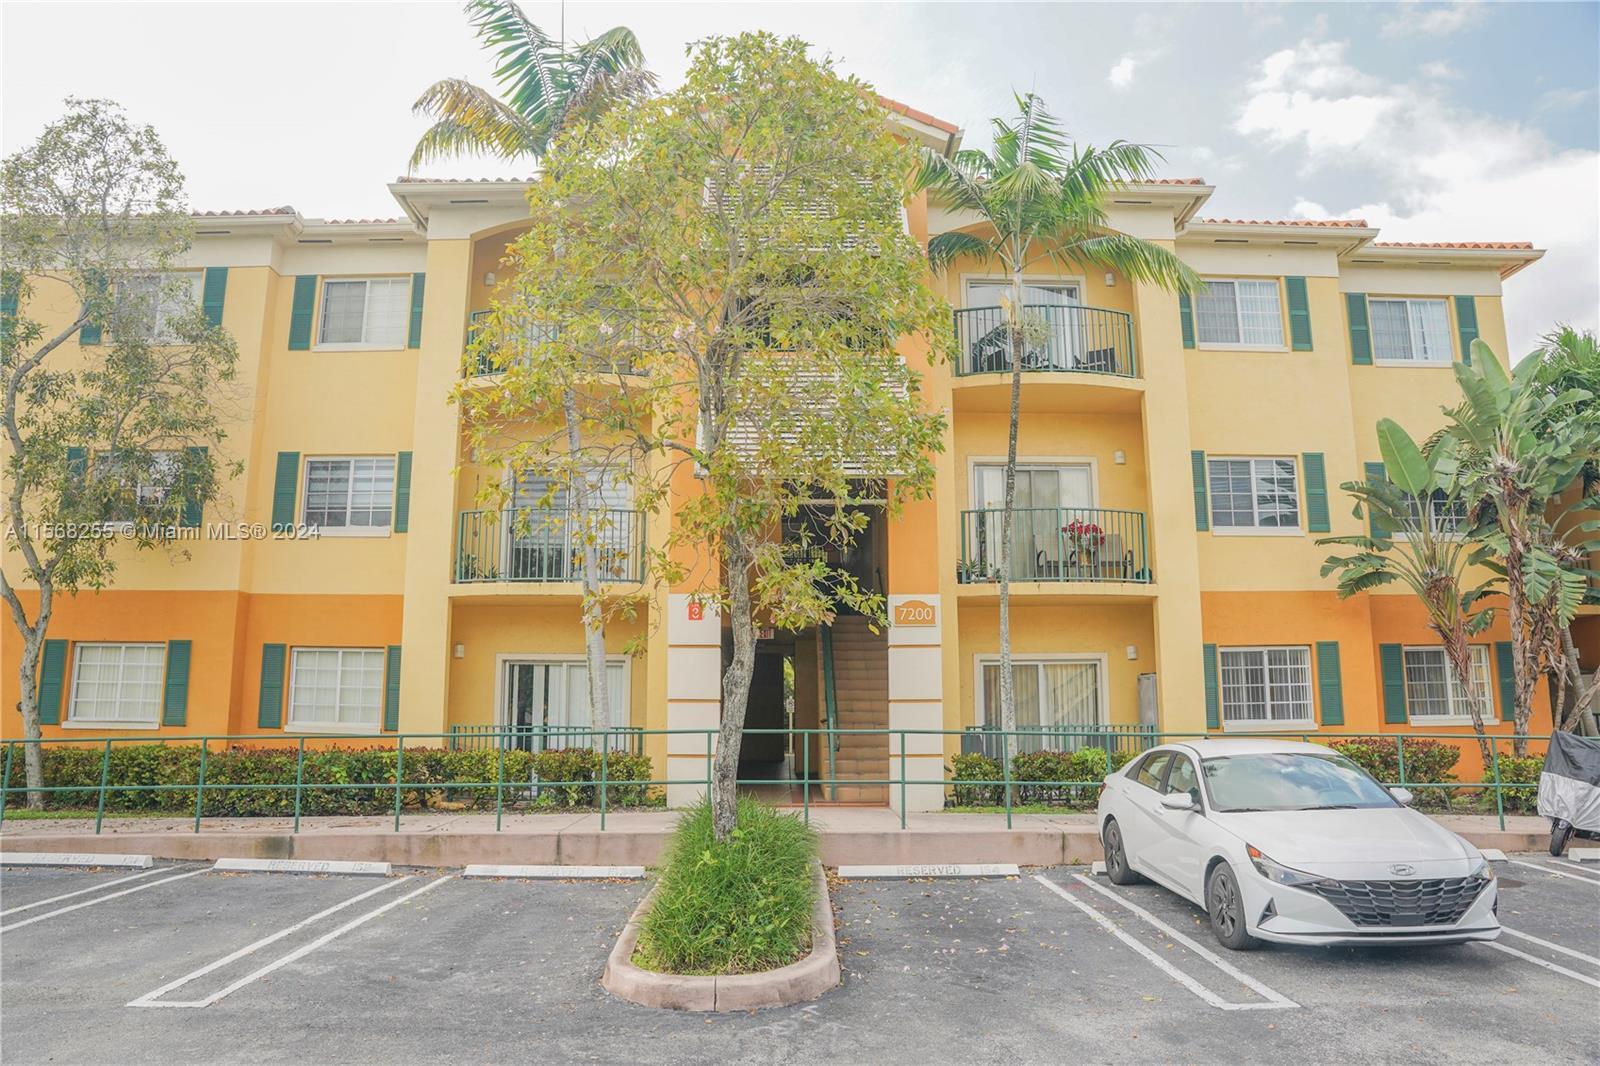 Photo of 7200 NW 114 Ave #305 in Doral, FL